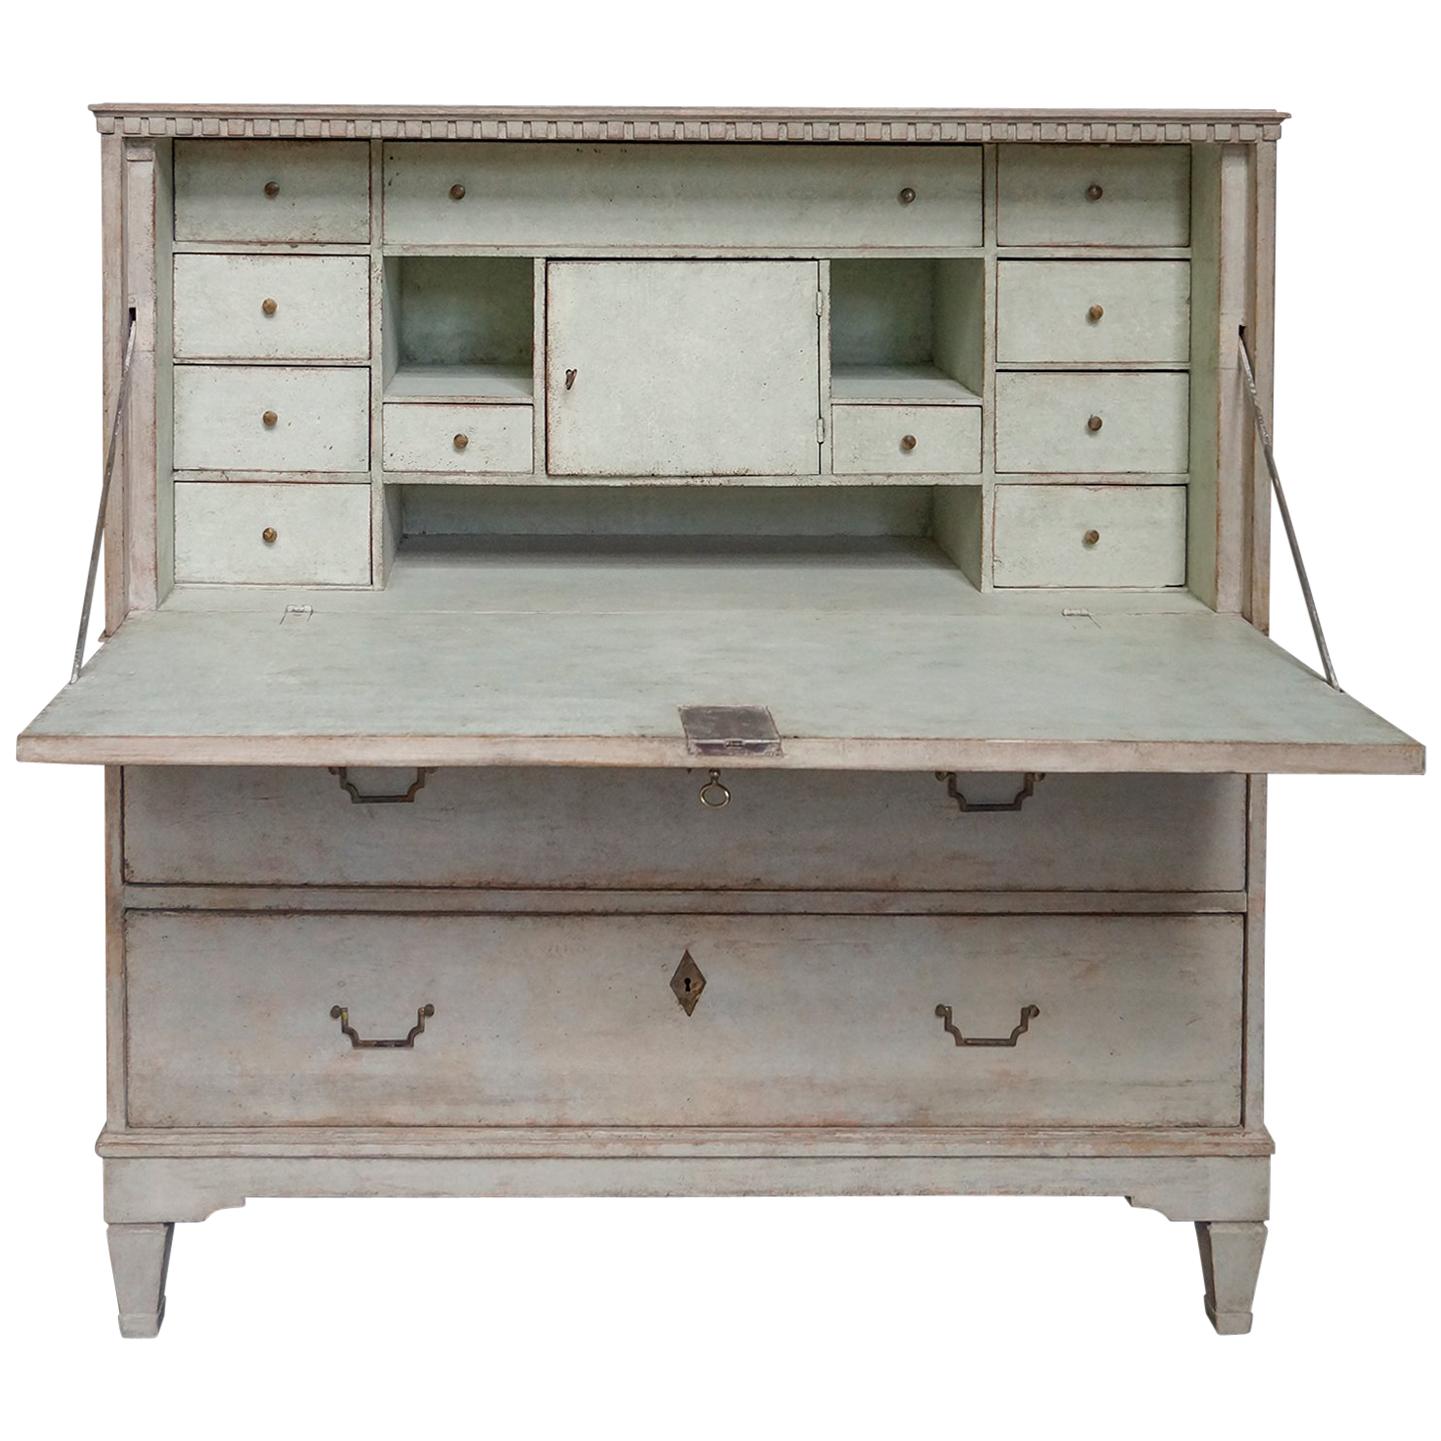 Late Gustavian Fall-Front Writing Desk